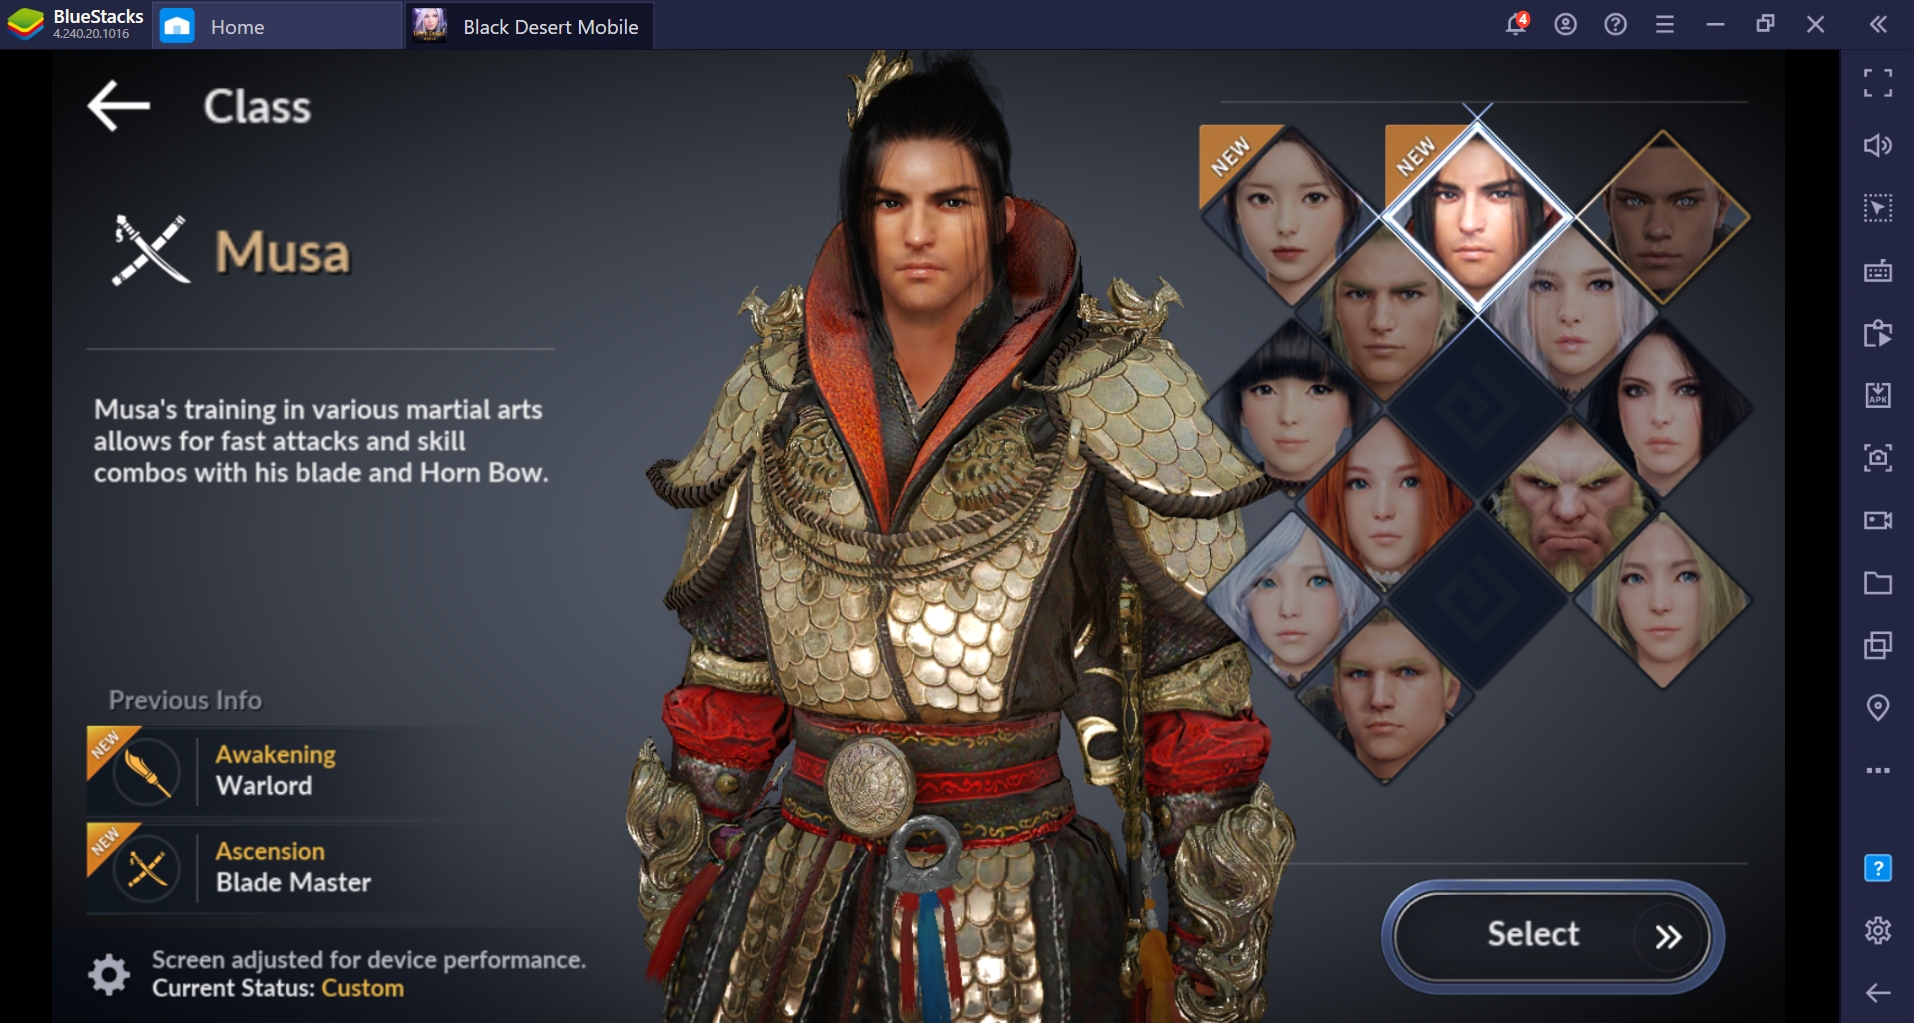 Black Desert Mobile Introduces 2 New Classes ‘Musa’ and ‘Maewha’